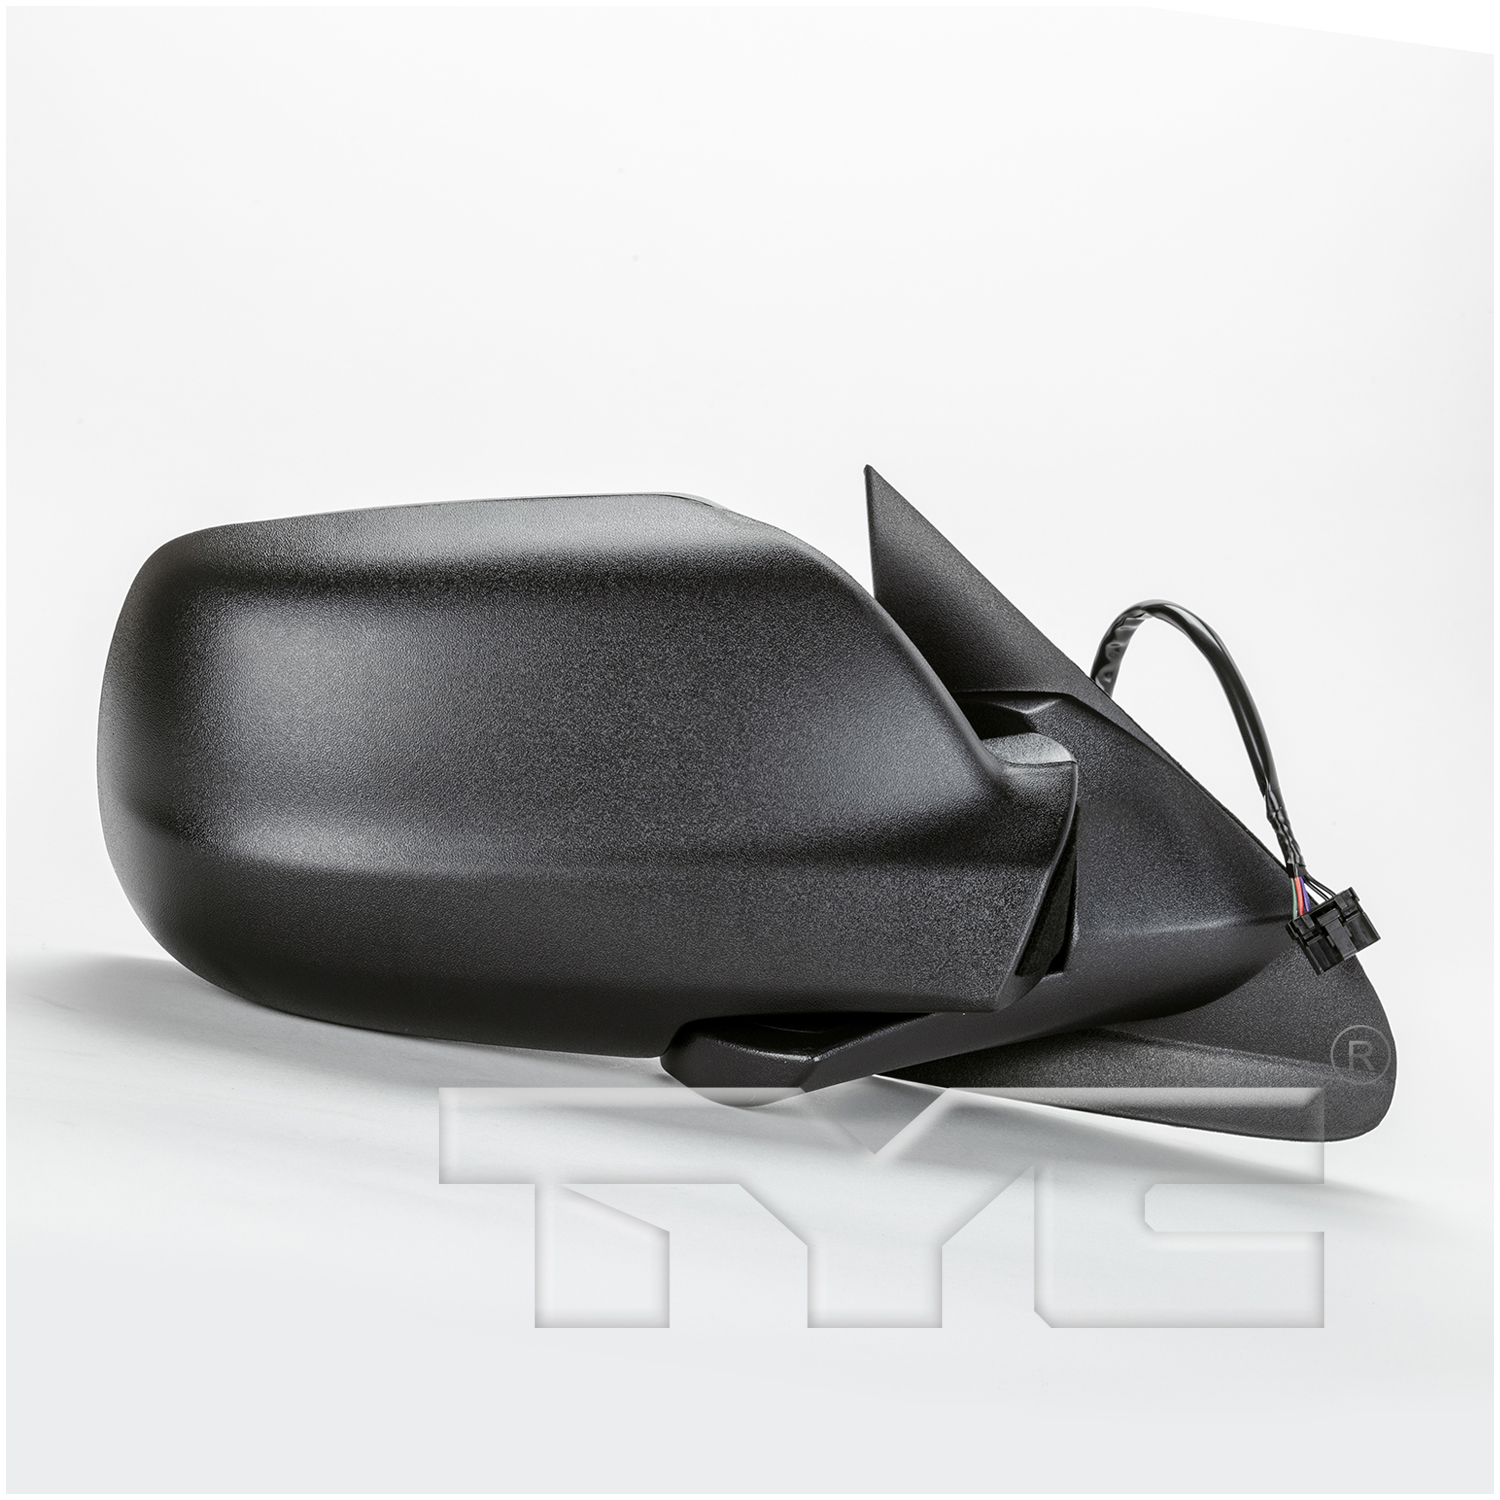 Aftermarket MIRRORS for JEEP - GRAND CHEROKEE, GRAND CHEROKEE,05-10,RT Mirror outside rear view